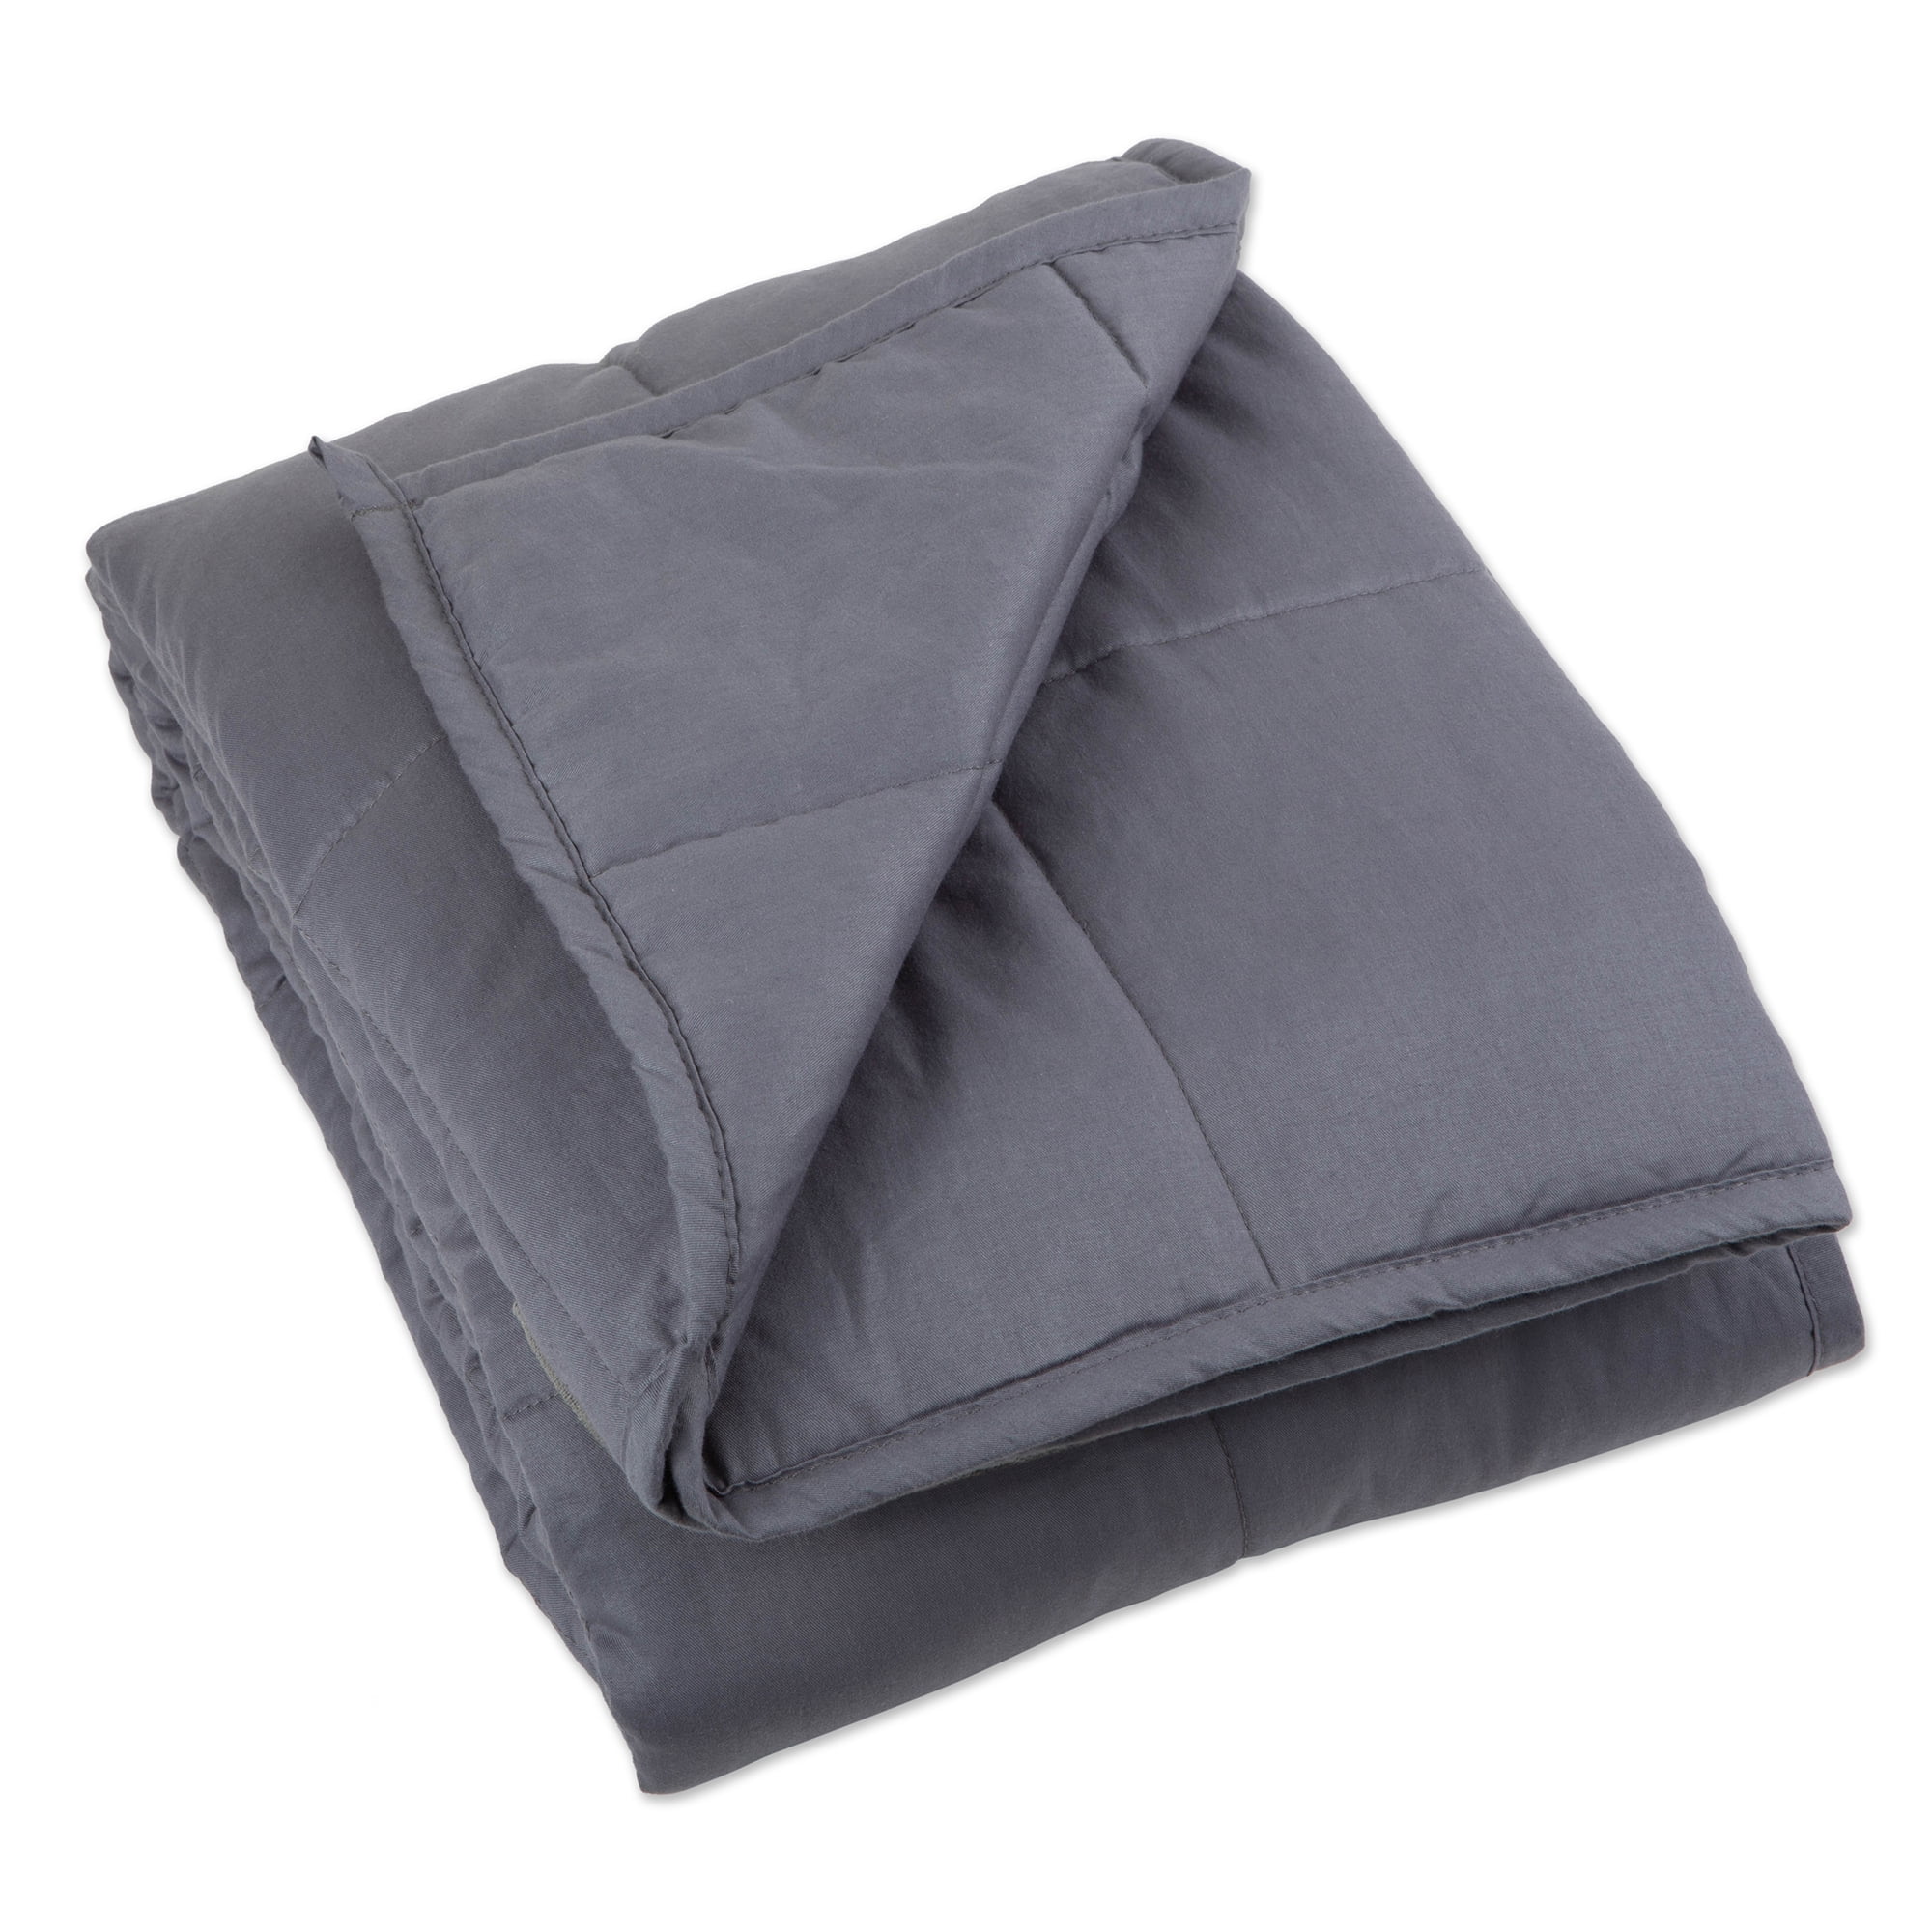 Bucky Weighted Blanket for Anxiety, ADHD, Autism, Insomnia, Stress